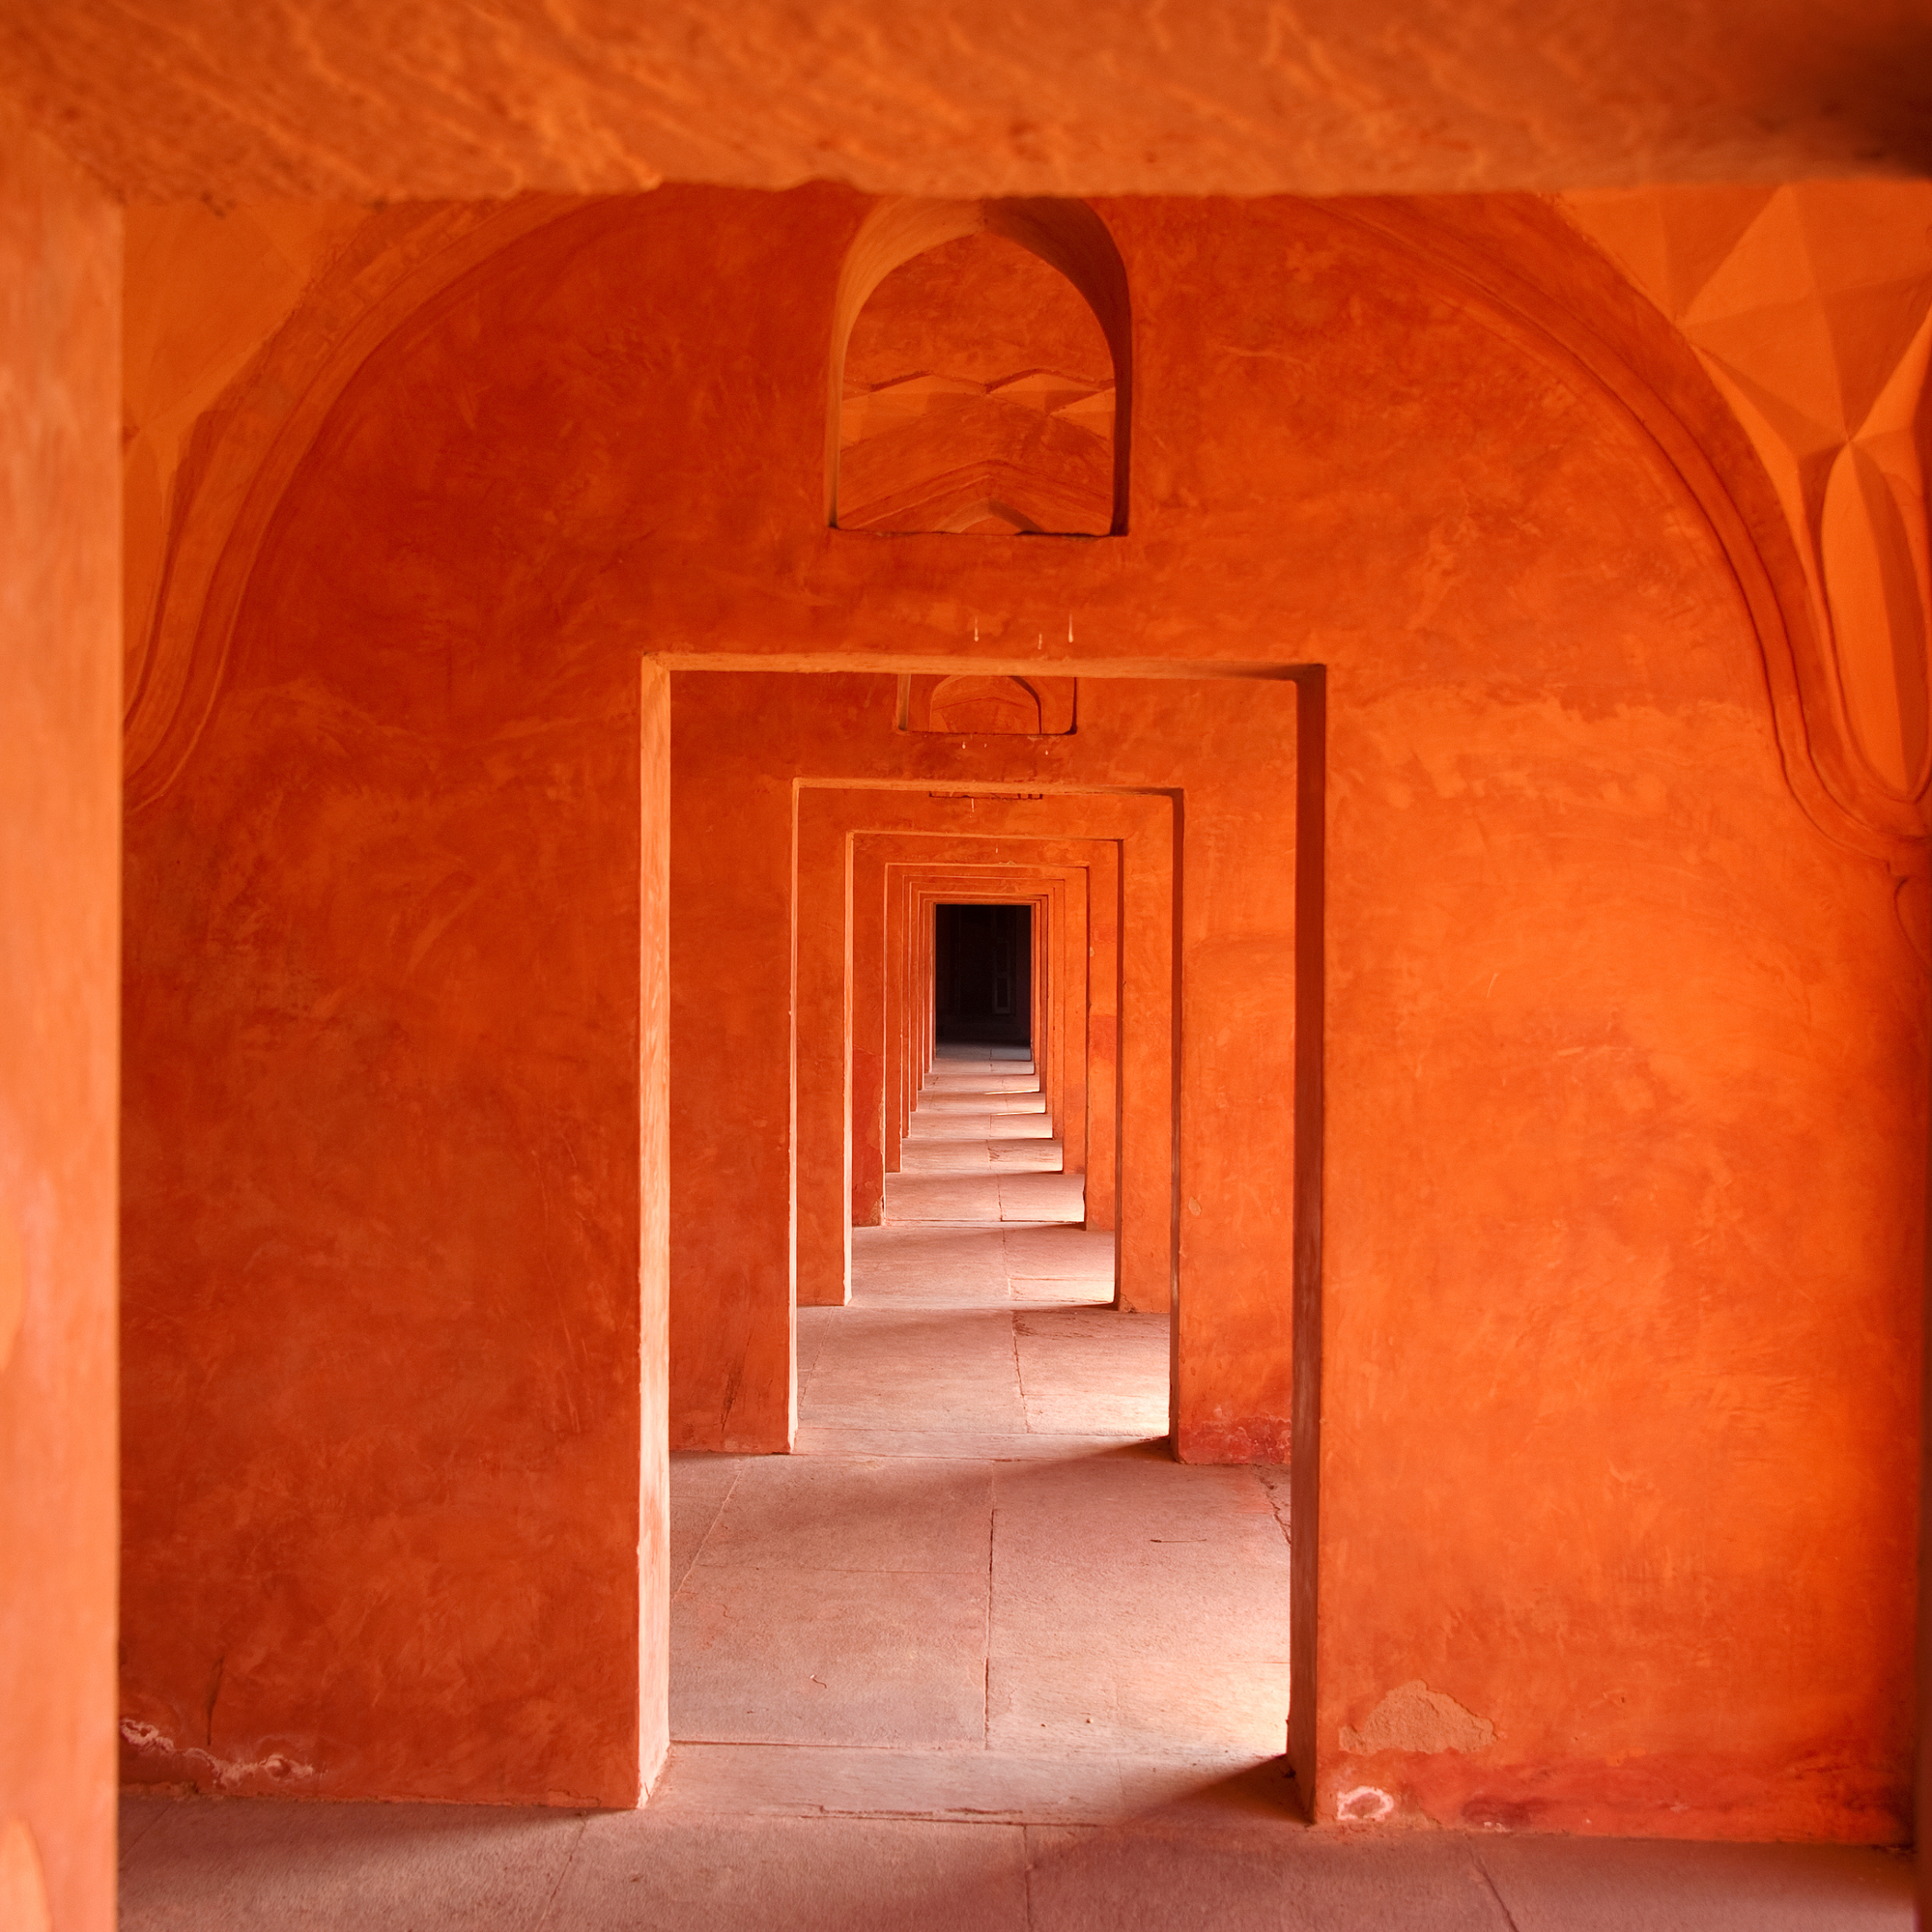 Photo of a series of bright orange painted walls with successive doorways